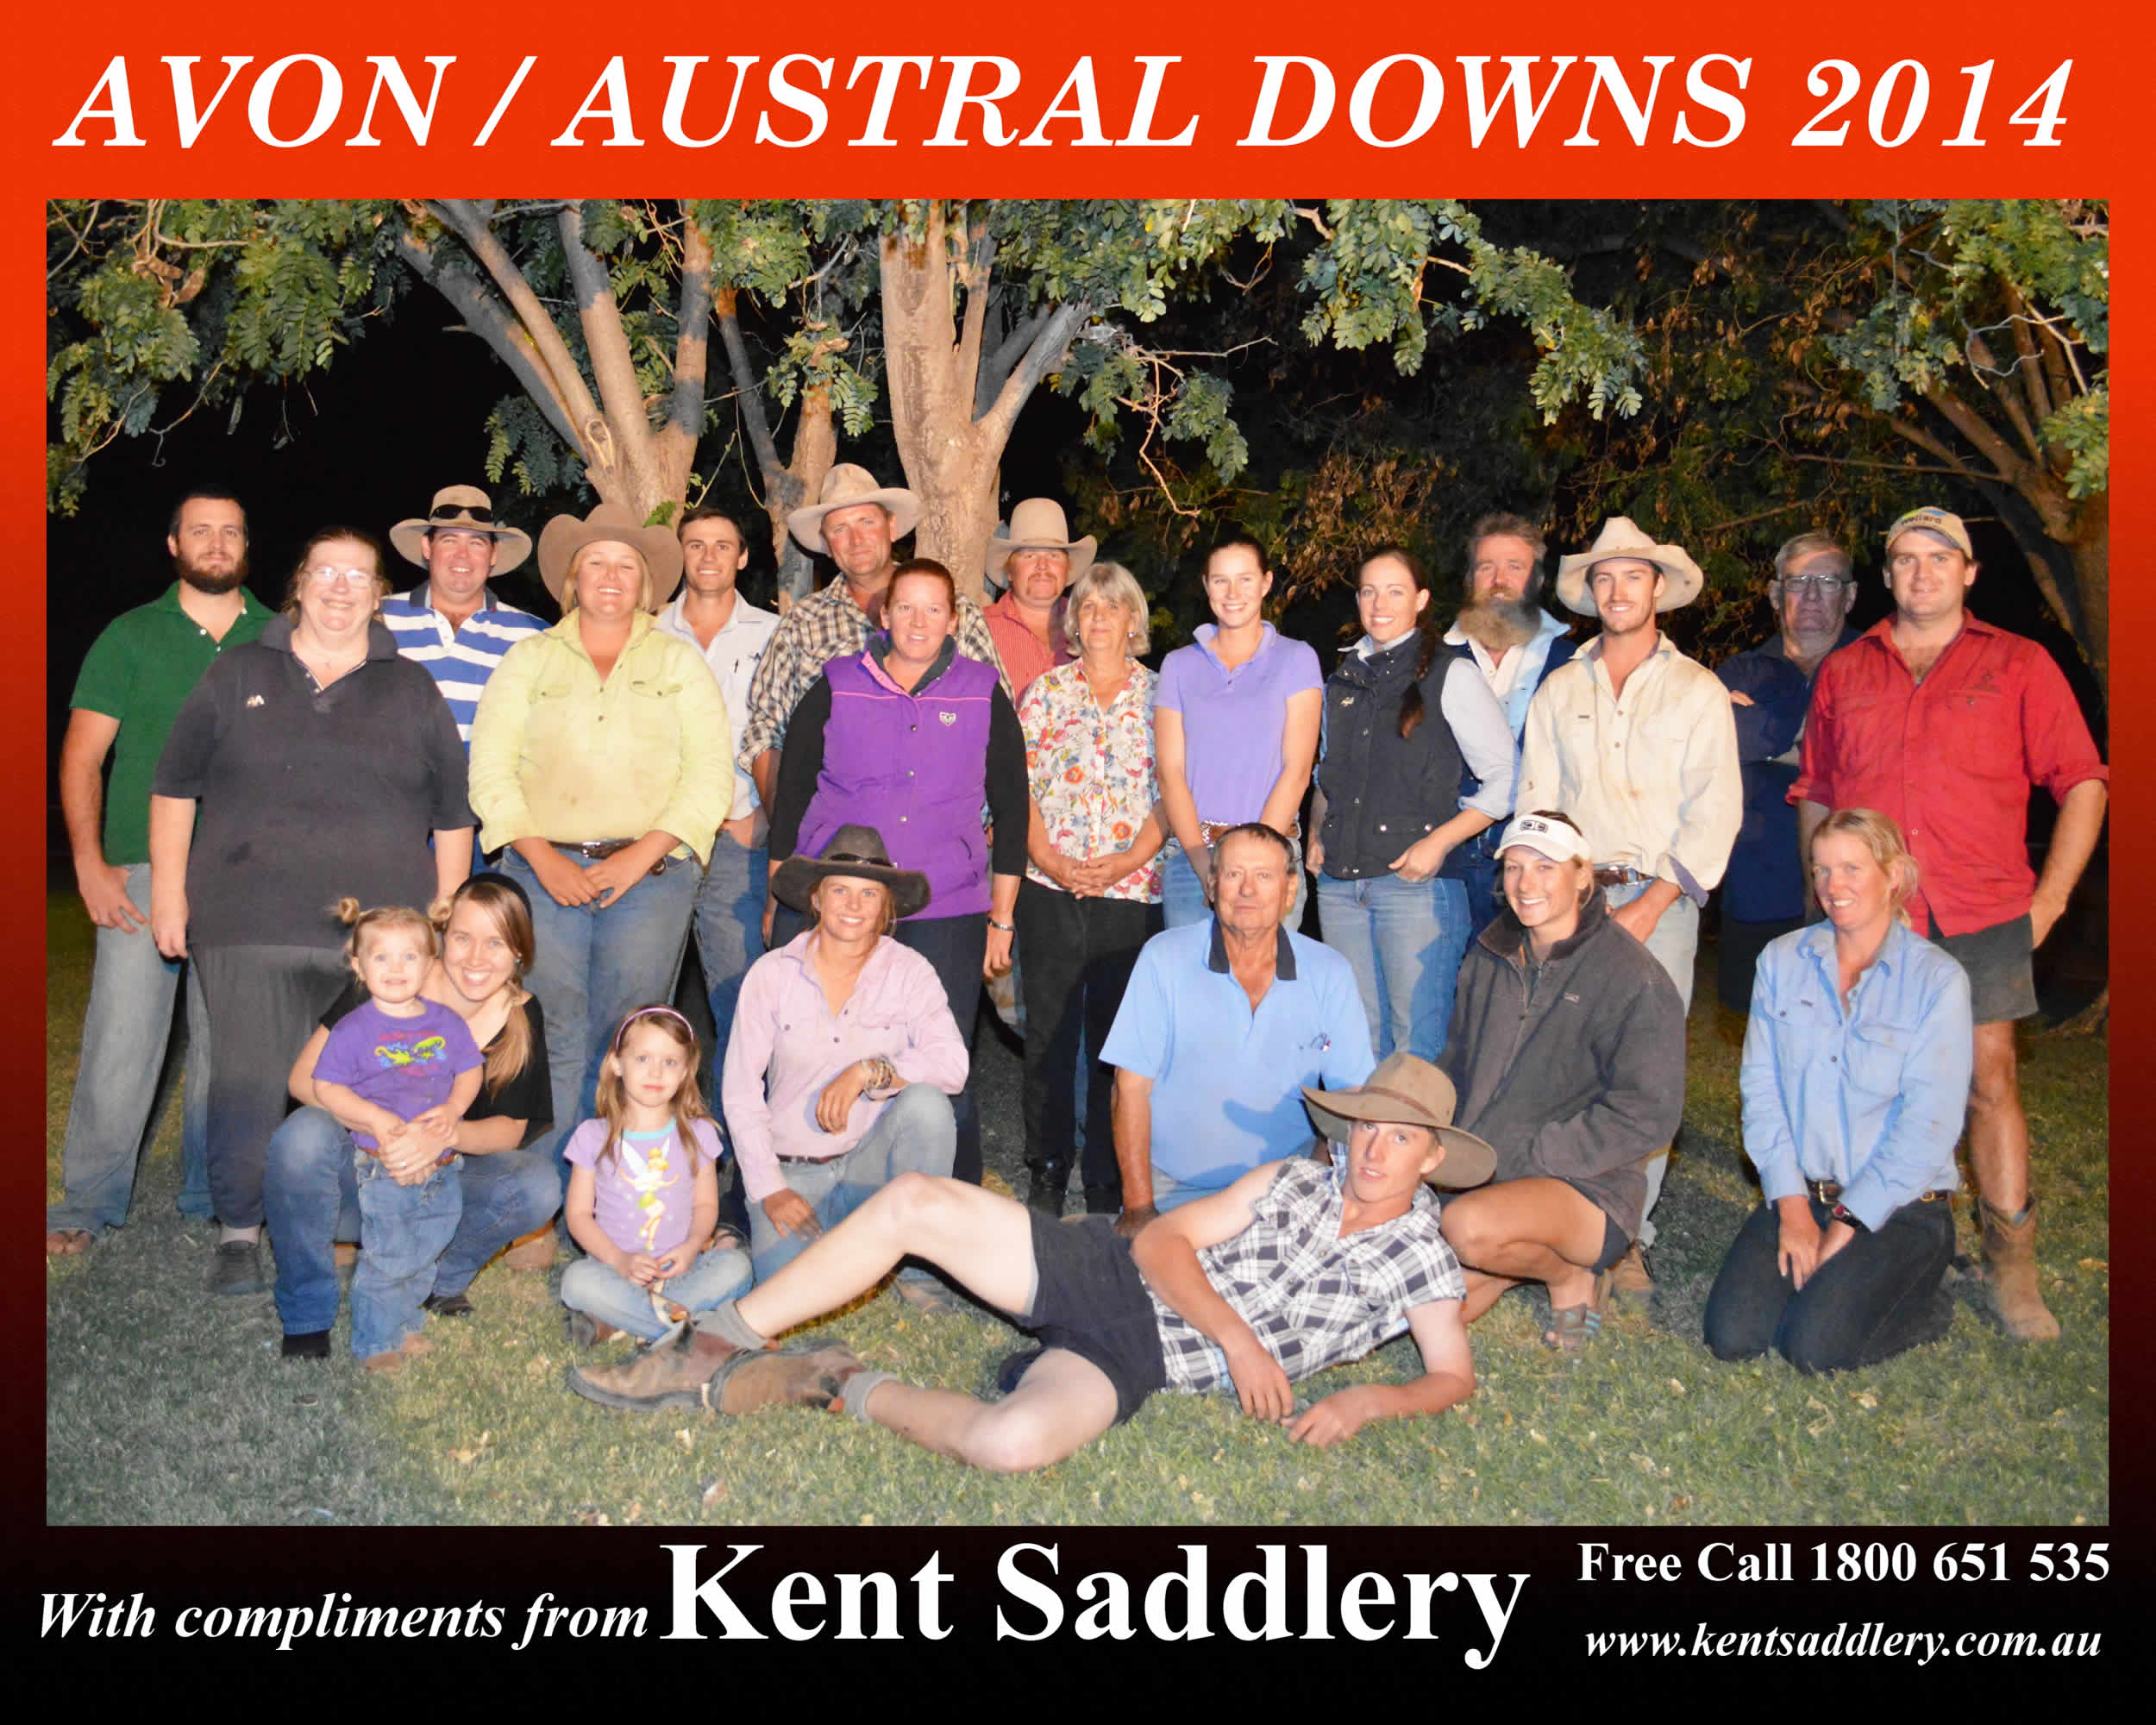 Northern Territory - Austral Downs 11